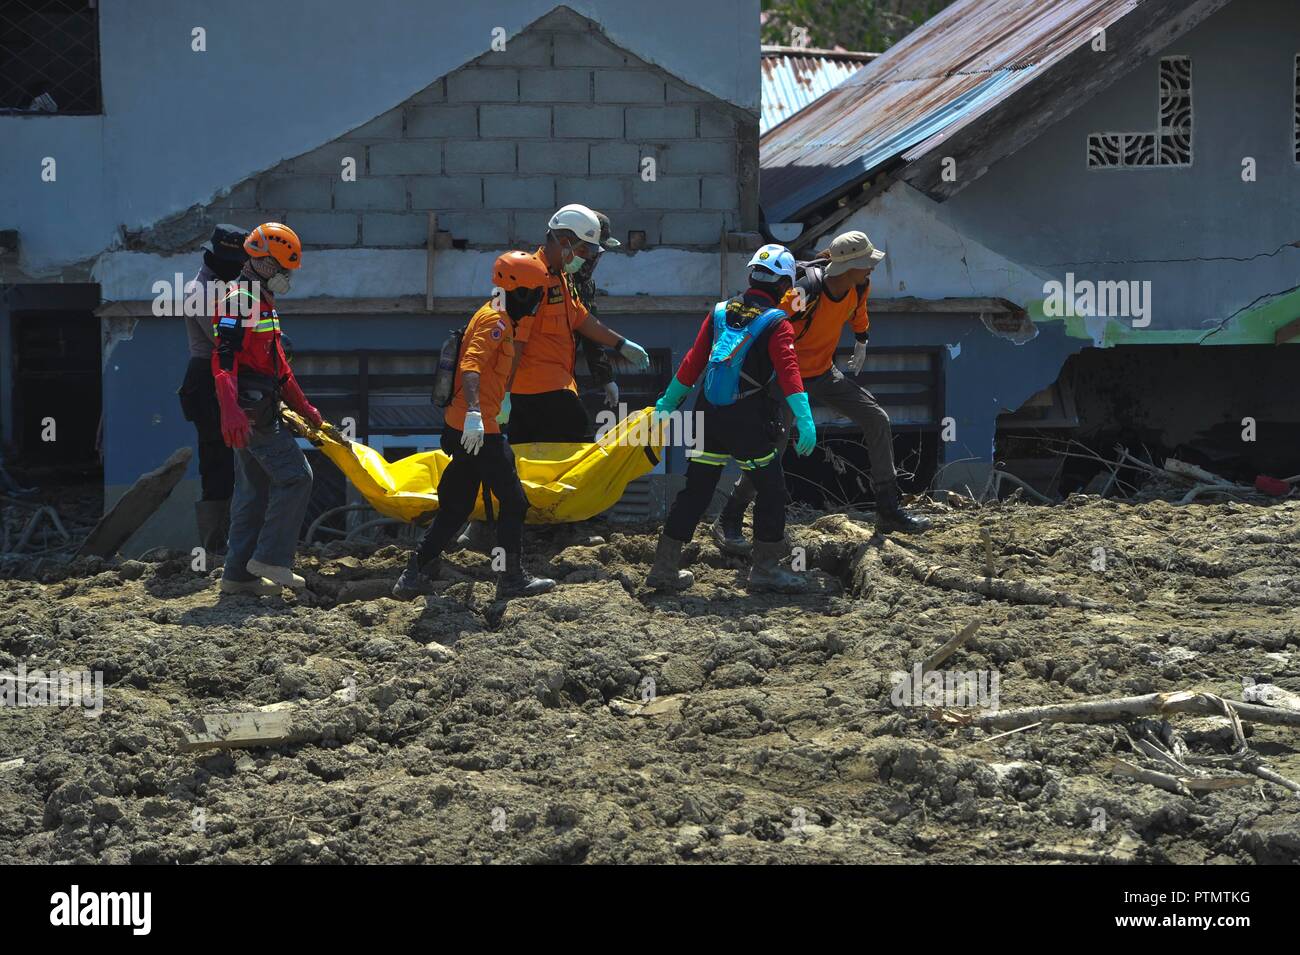 Poso, Indonesia. 10th Oct, 2018. Indonesian search and rescue team carry a plastic bag containing dead body at Petobo in Poso, Central Sulawesi Province, Indonesia, on Oct. 10, 2018. The earthquakes and the tsunami have killed at least 2,010 people, left over 5,000 others missing and triggered massive damage and a huge evacuation, according to the national disaster management agency. Credit: Zulkarnain/Xinhua/Alamy Live News Stock Photo